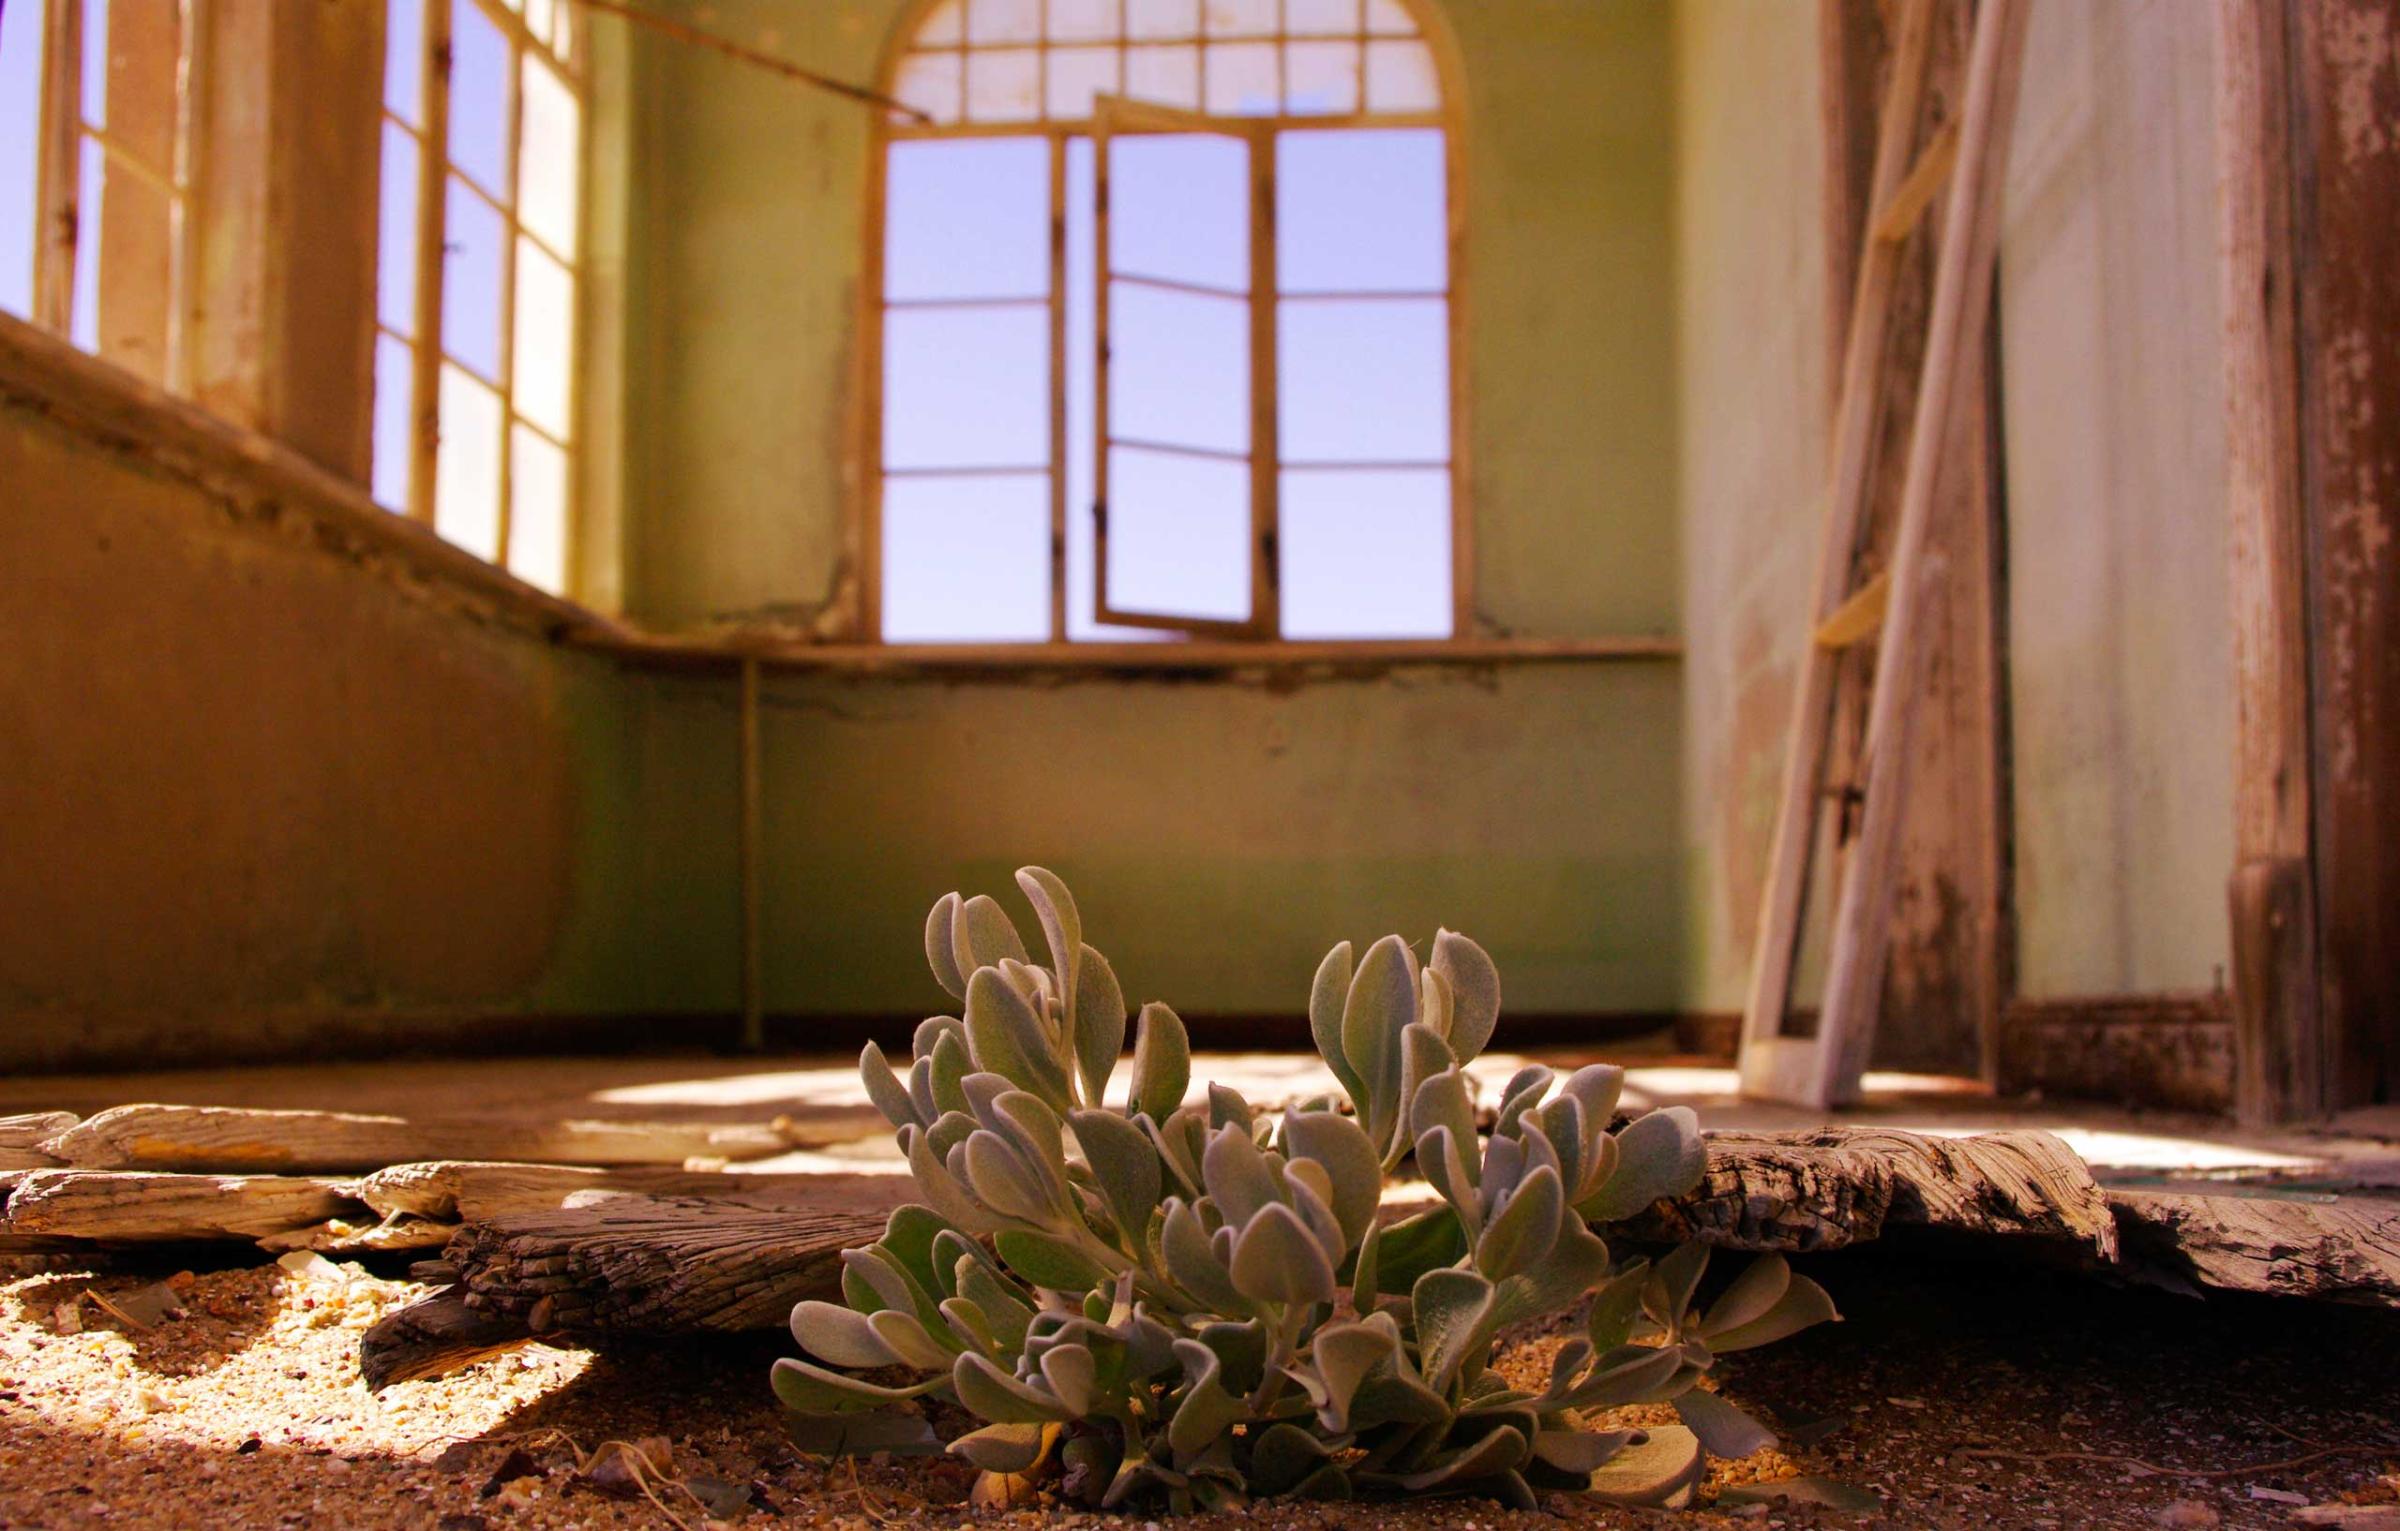 A plant takes advantage of the available shelter in a dilapidated house in Kolmanskop, Namibia.